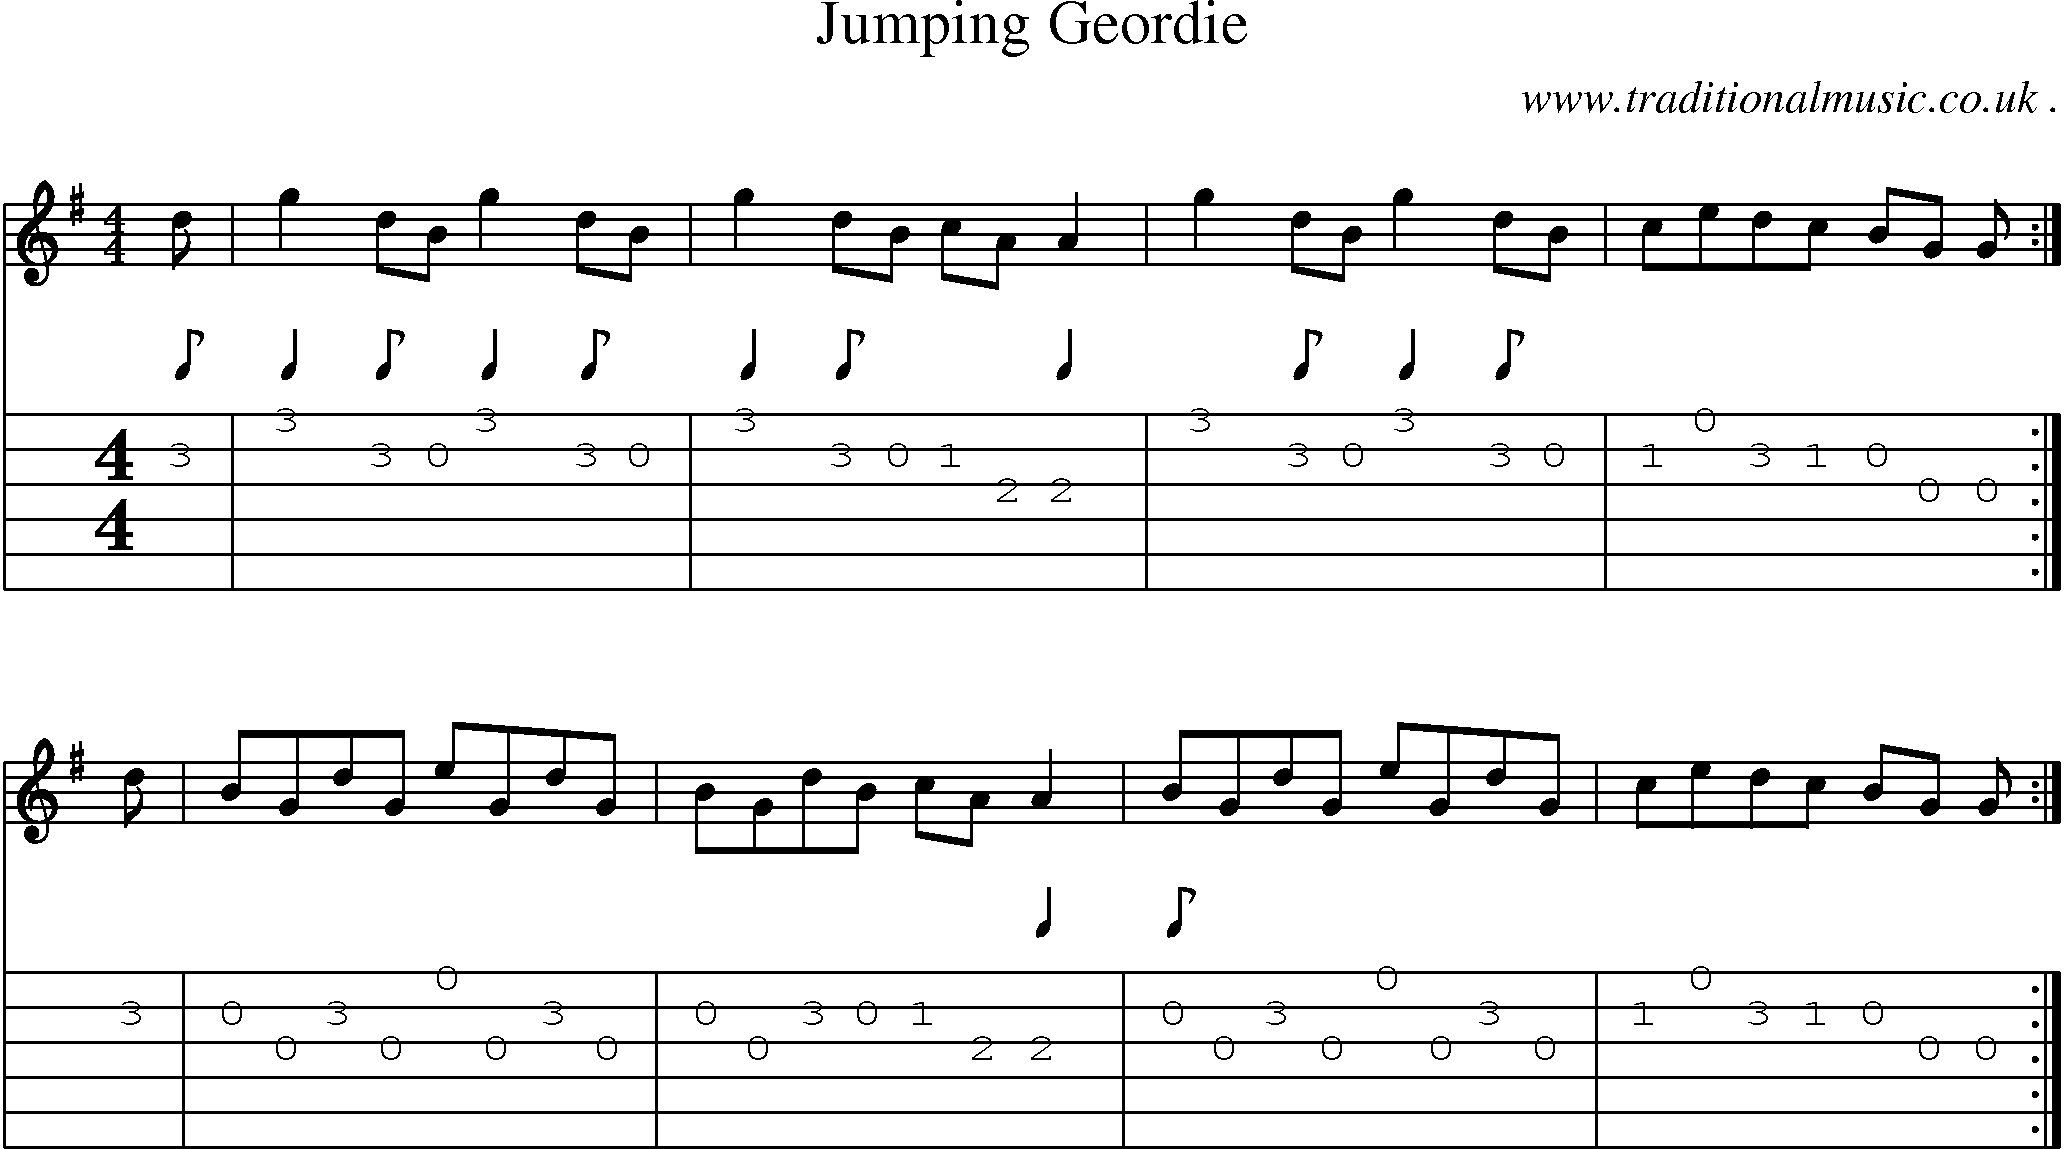 Sheet-music  score, Chords and Guitar Tabs for Jumping Geordie